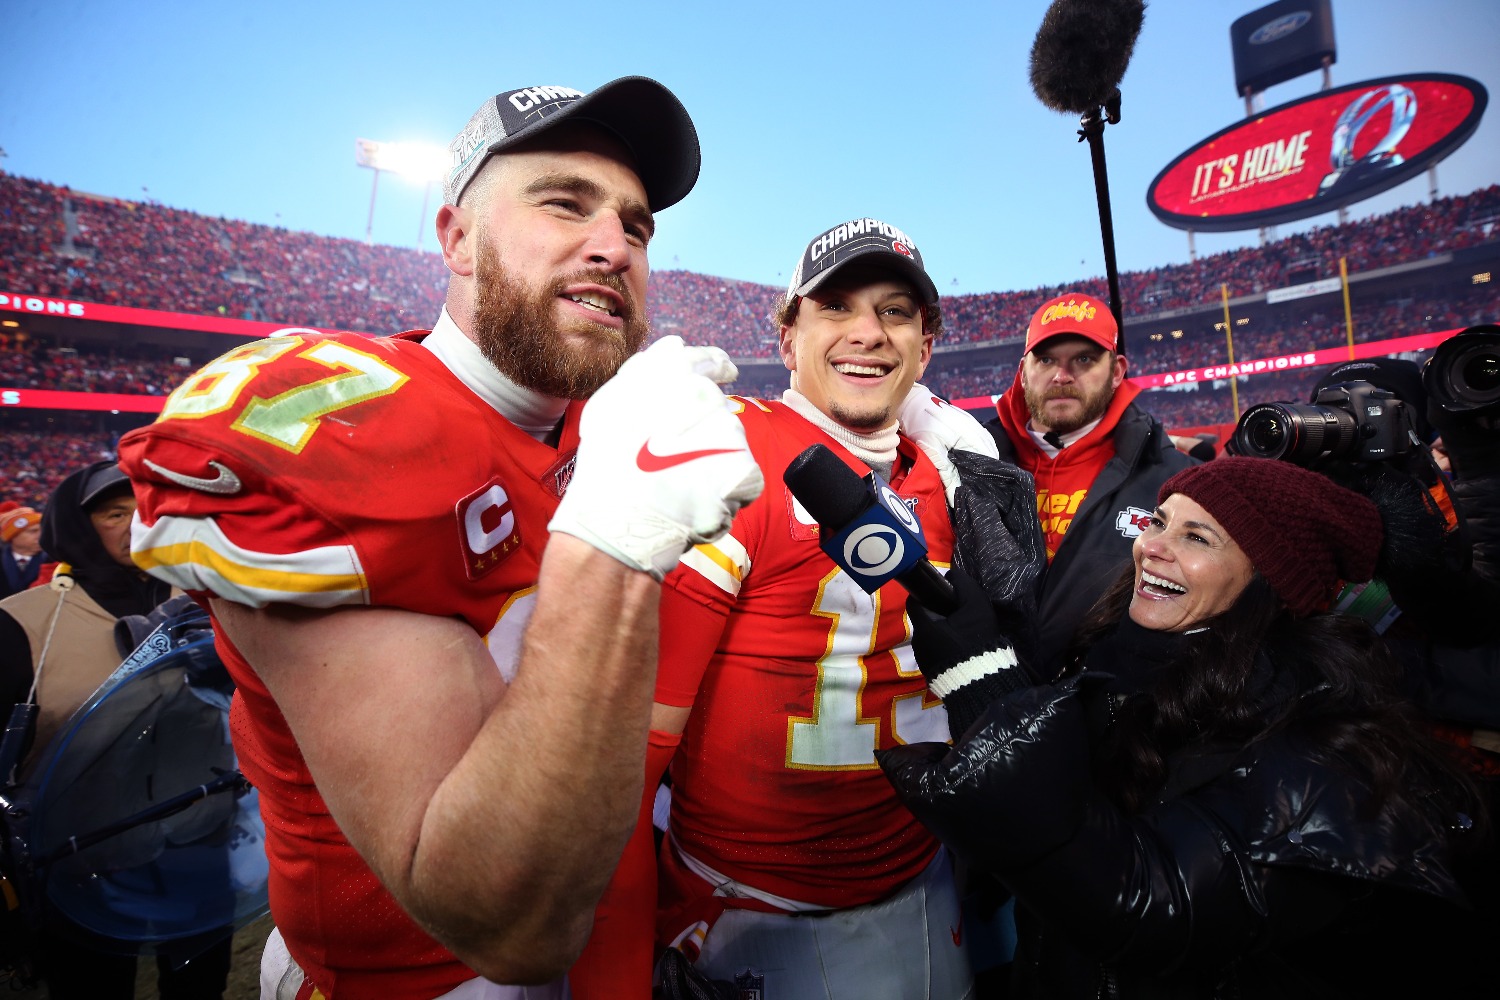 The Chiefs managed to lock up Patrick Mahomes, Chris Jones, and Travis Kelce after having just $177 in cap space earlier this offseason.